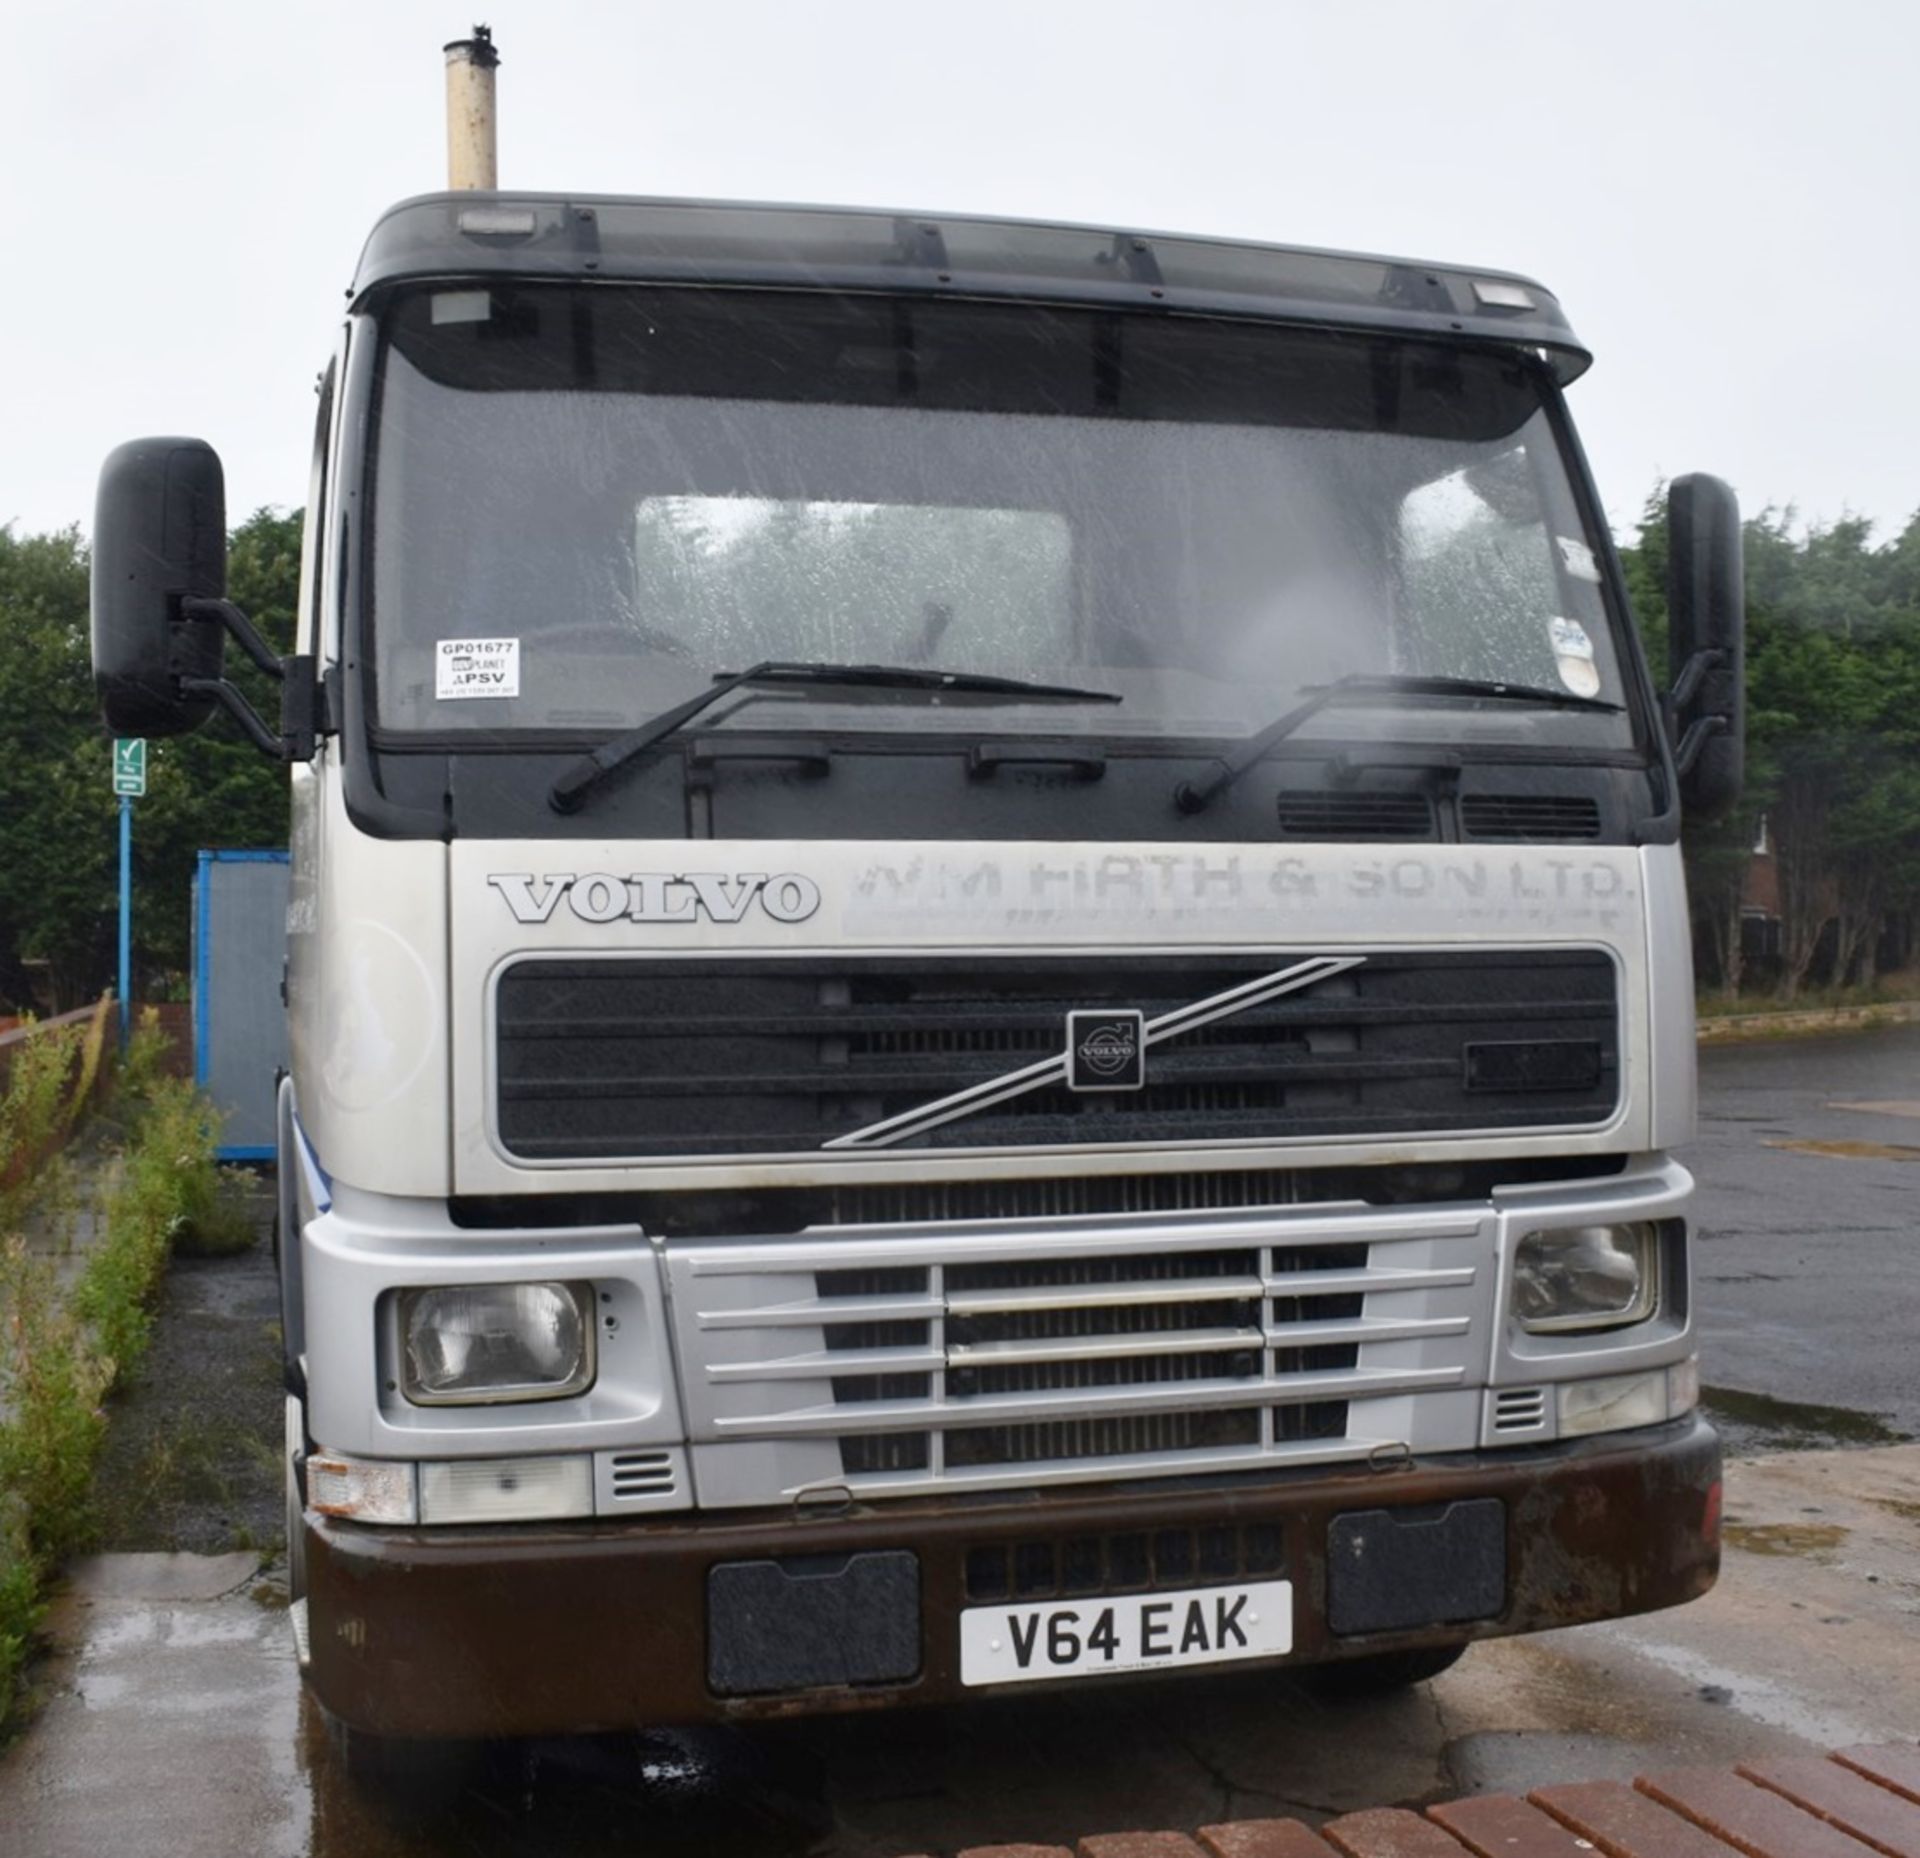 1 x Volvo 340 Plant Lorry With Tipper Chasis and Fitted Winch - CL547 - Location: South Yorkshire. - Image 14 of 25